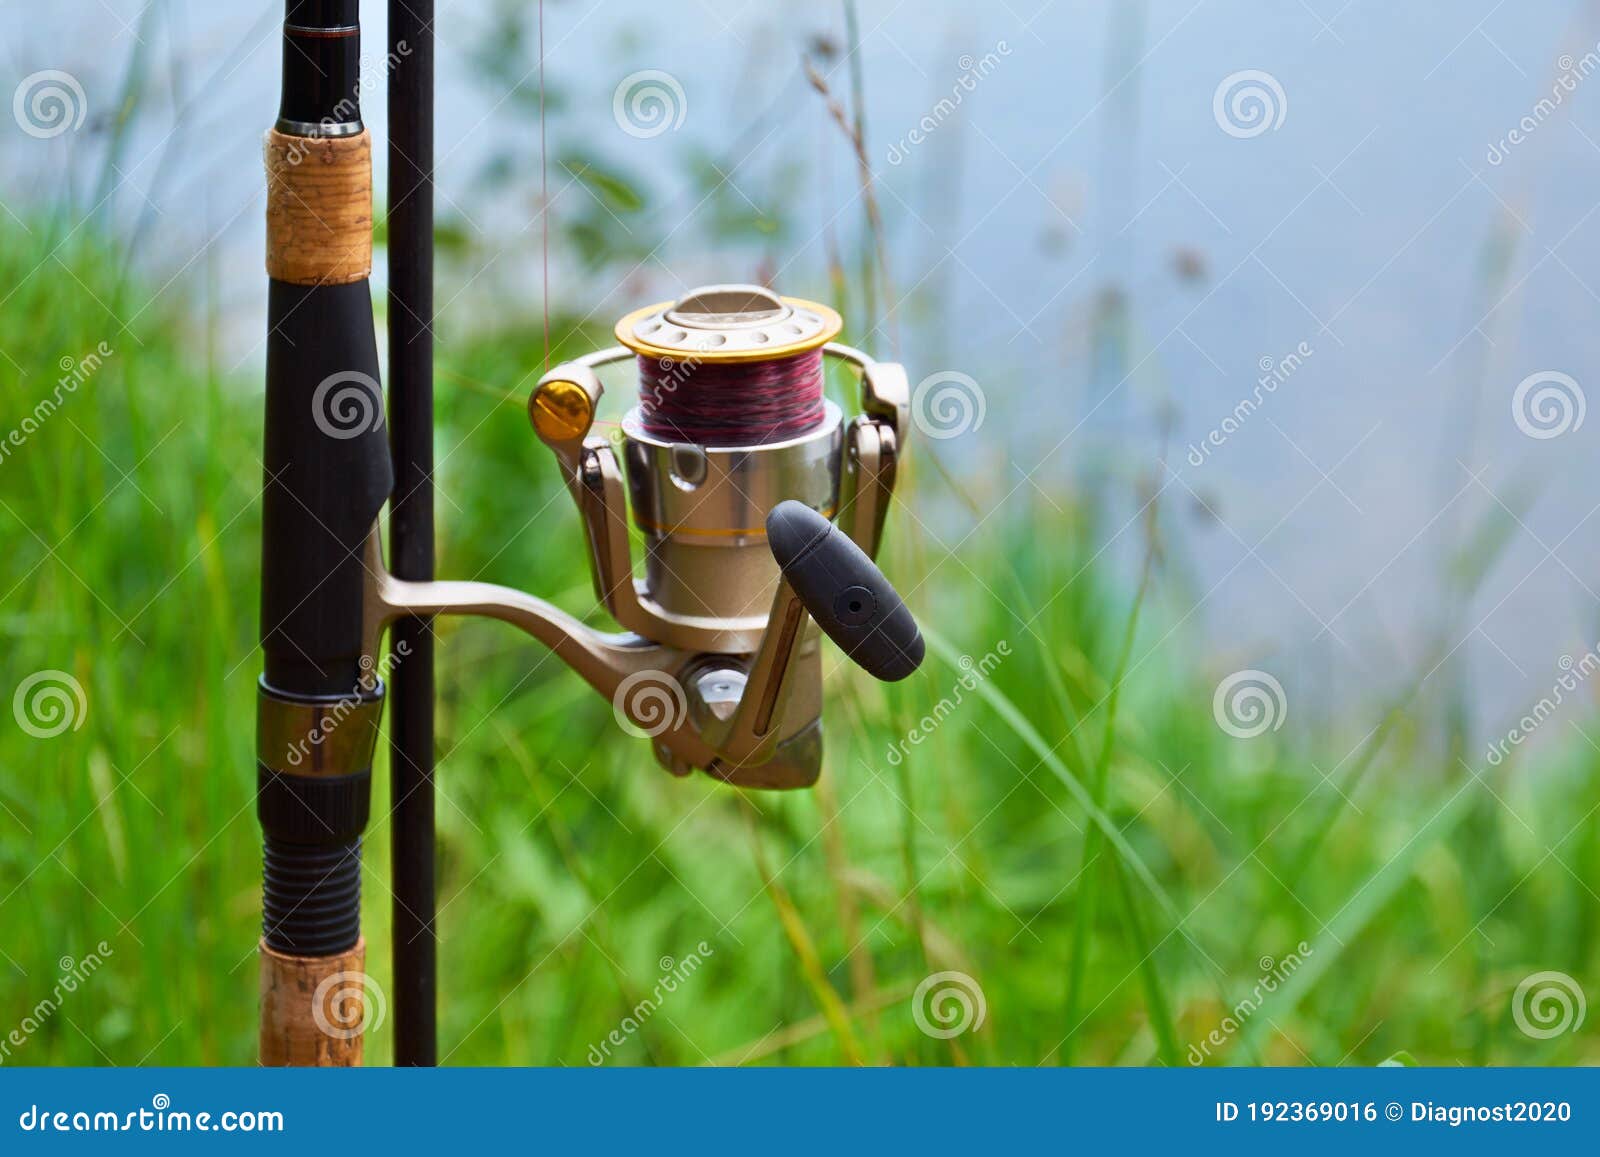 Feeder Fishing Rod with Coil on the Stand Against the Background